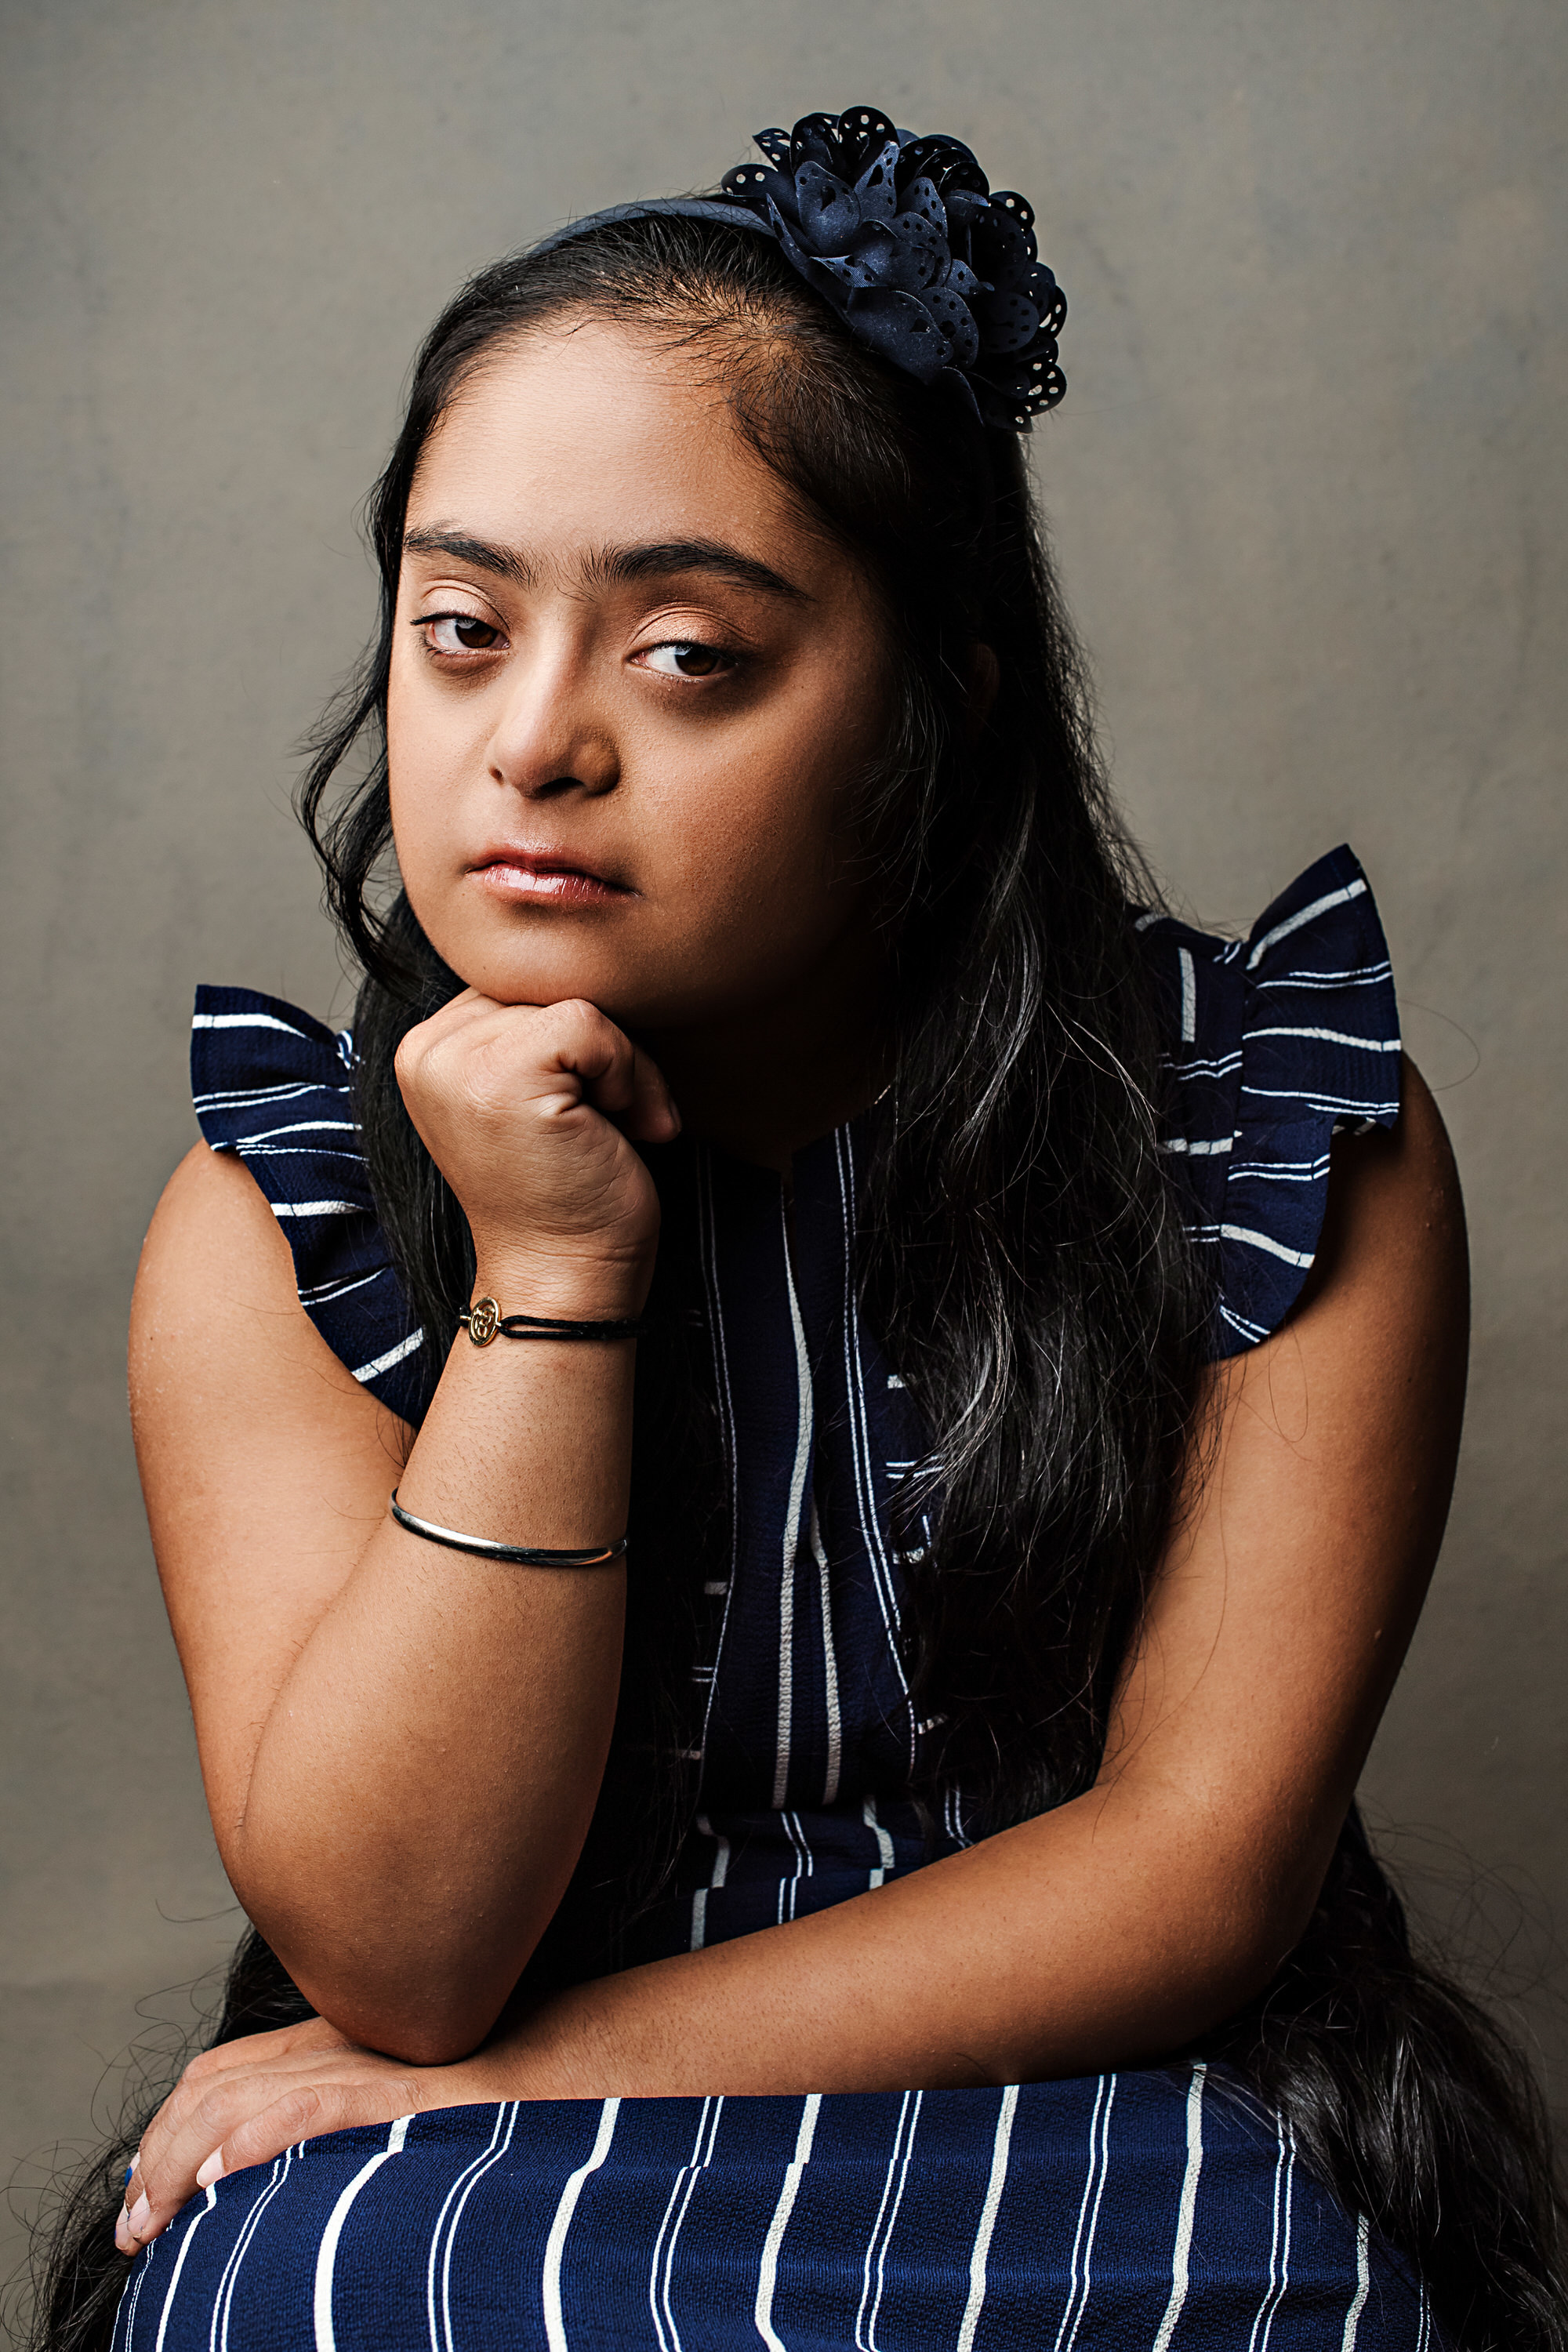 Bandagi Jaggi, girl with Down syndrome wearing a blue striped dress.